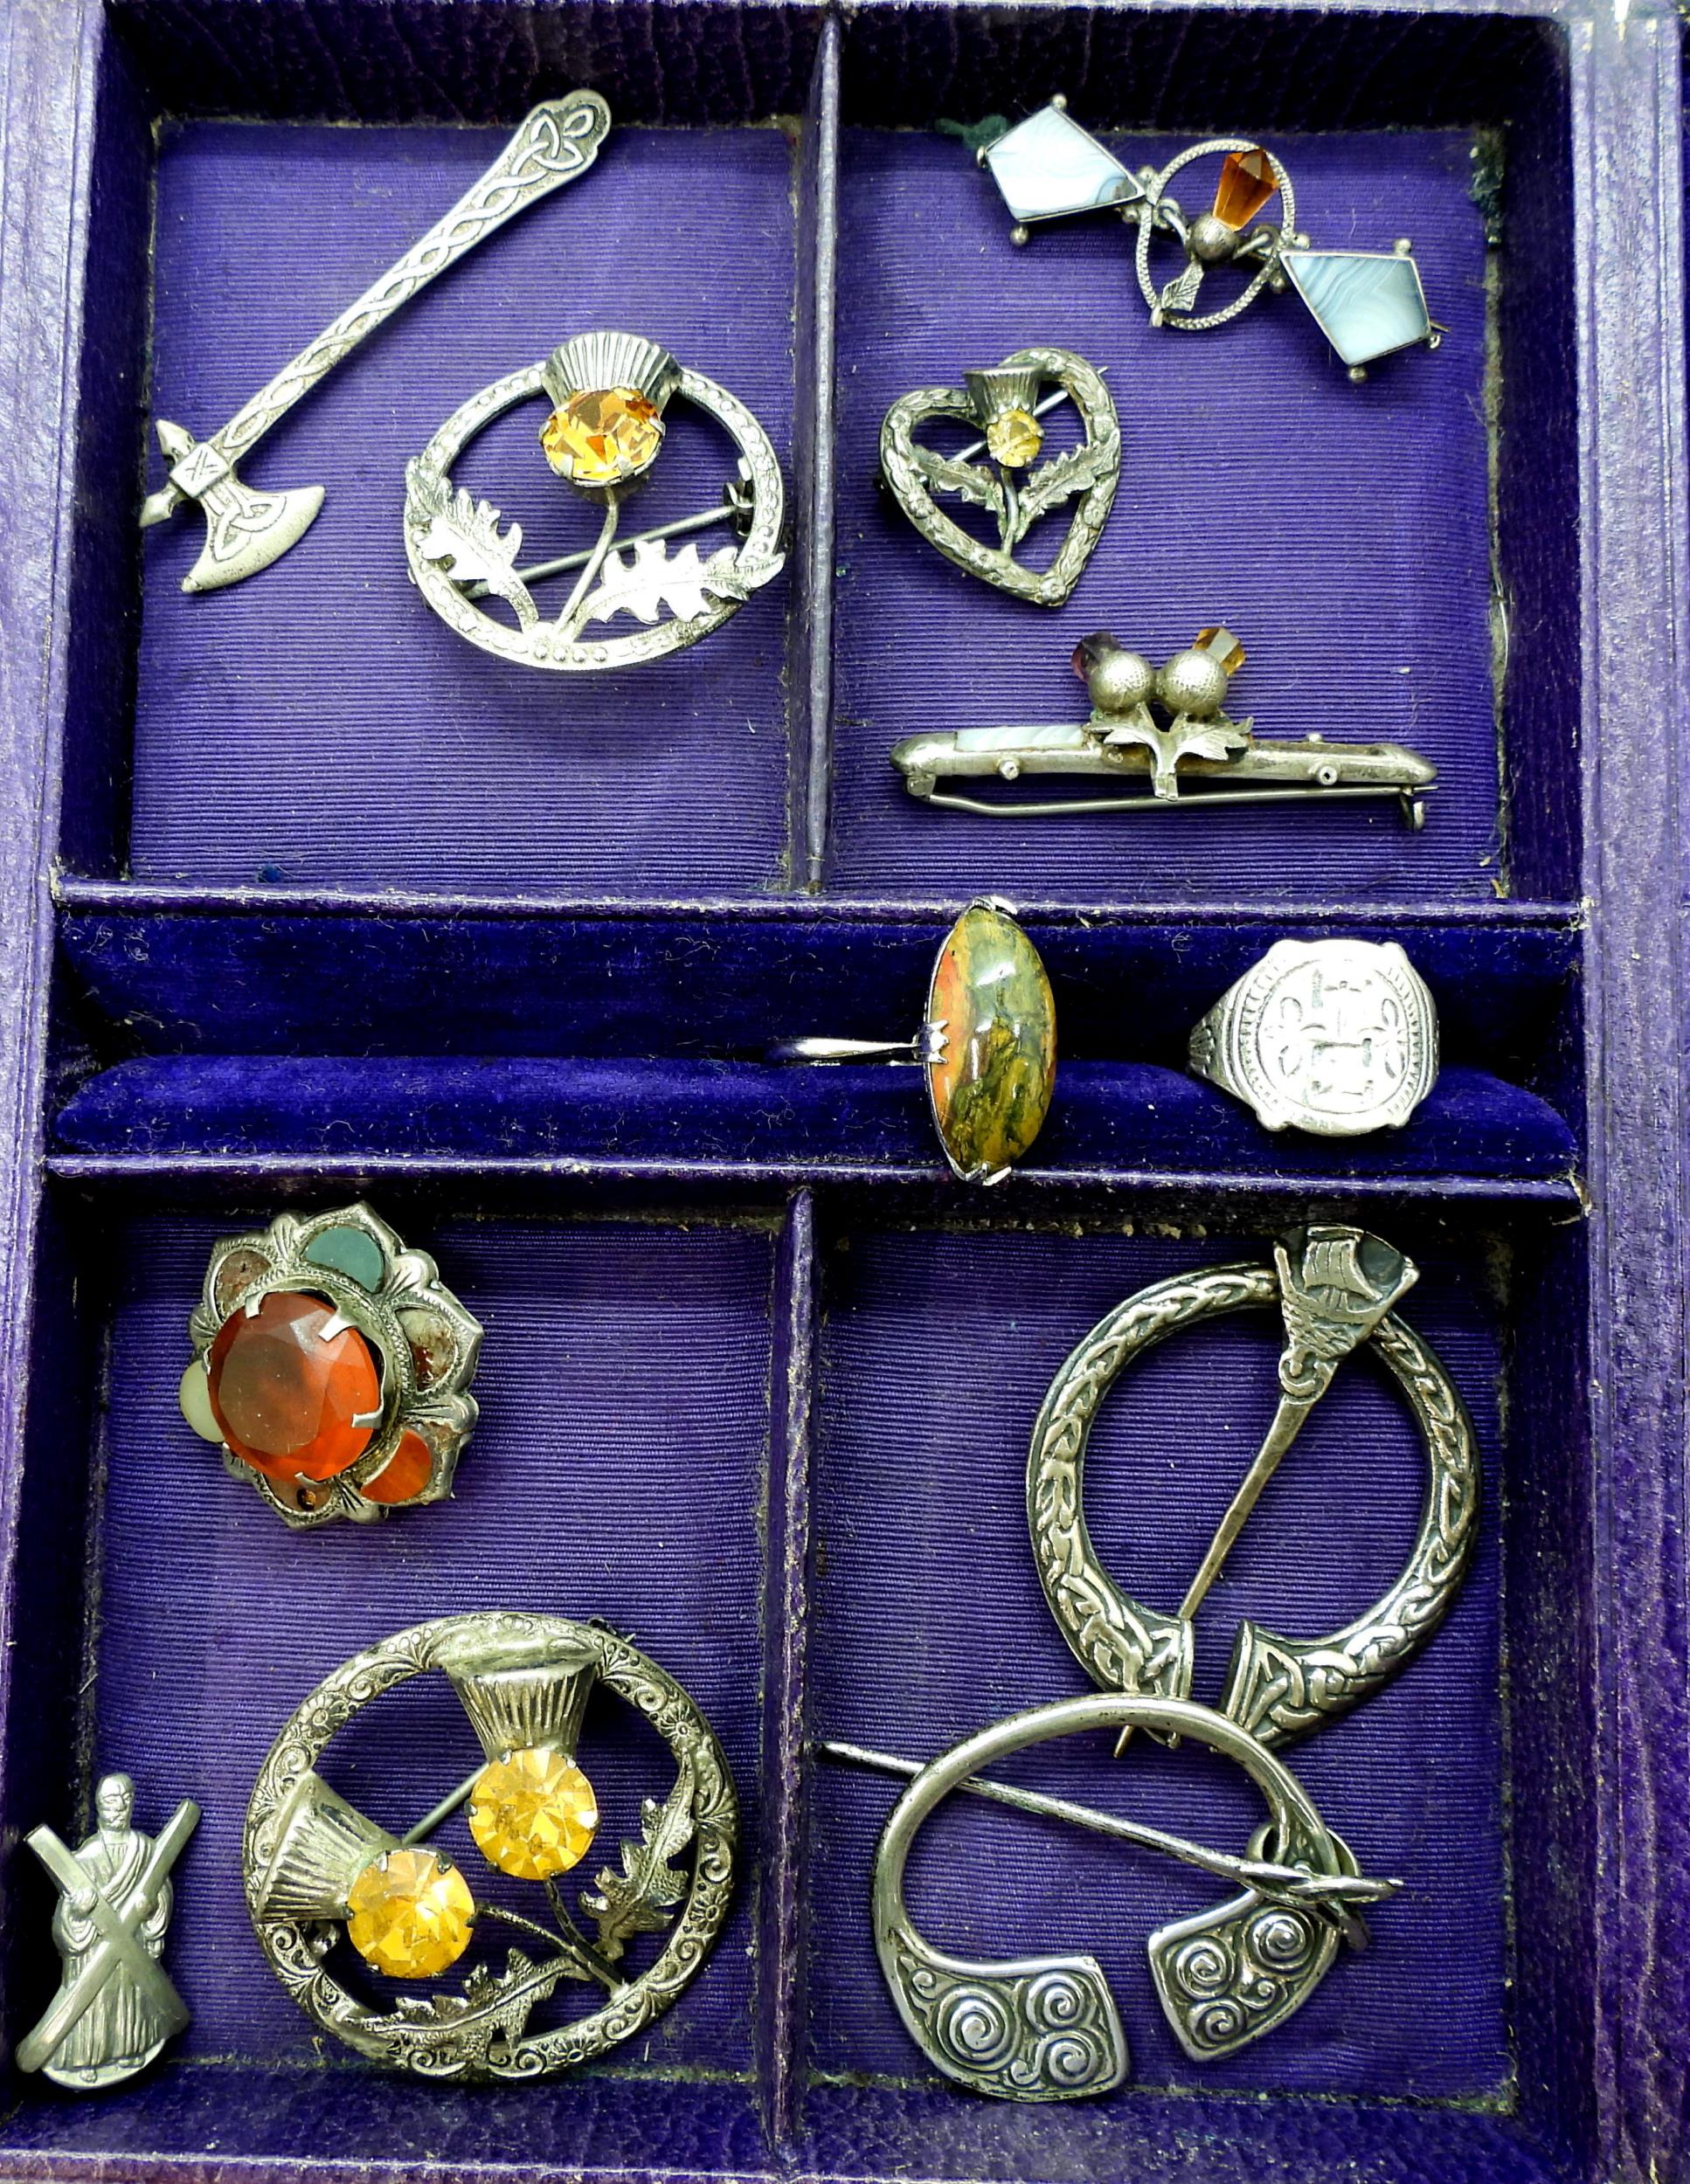 Scottish themed jewellery to include an Iain MacCormick, pen annular brooch, a further example by